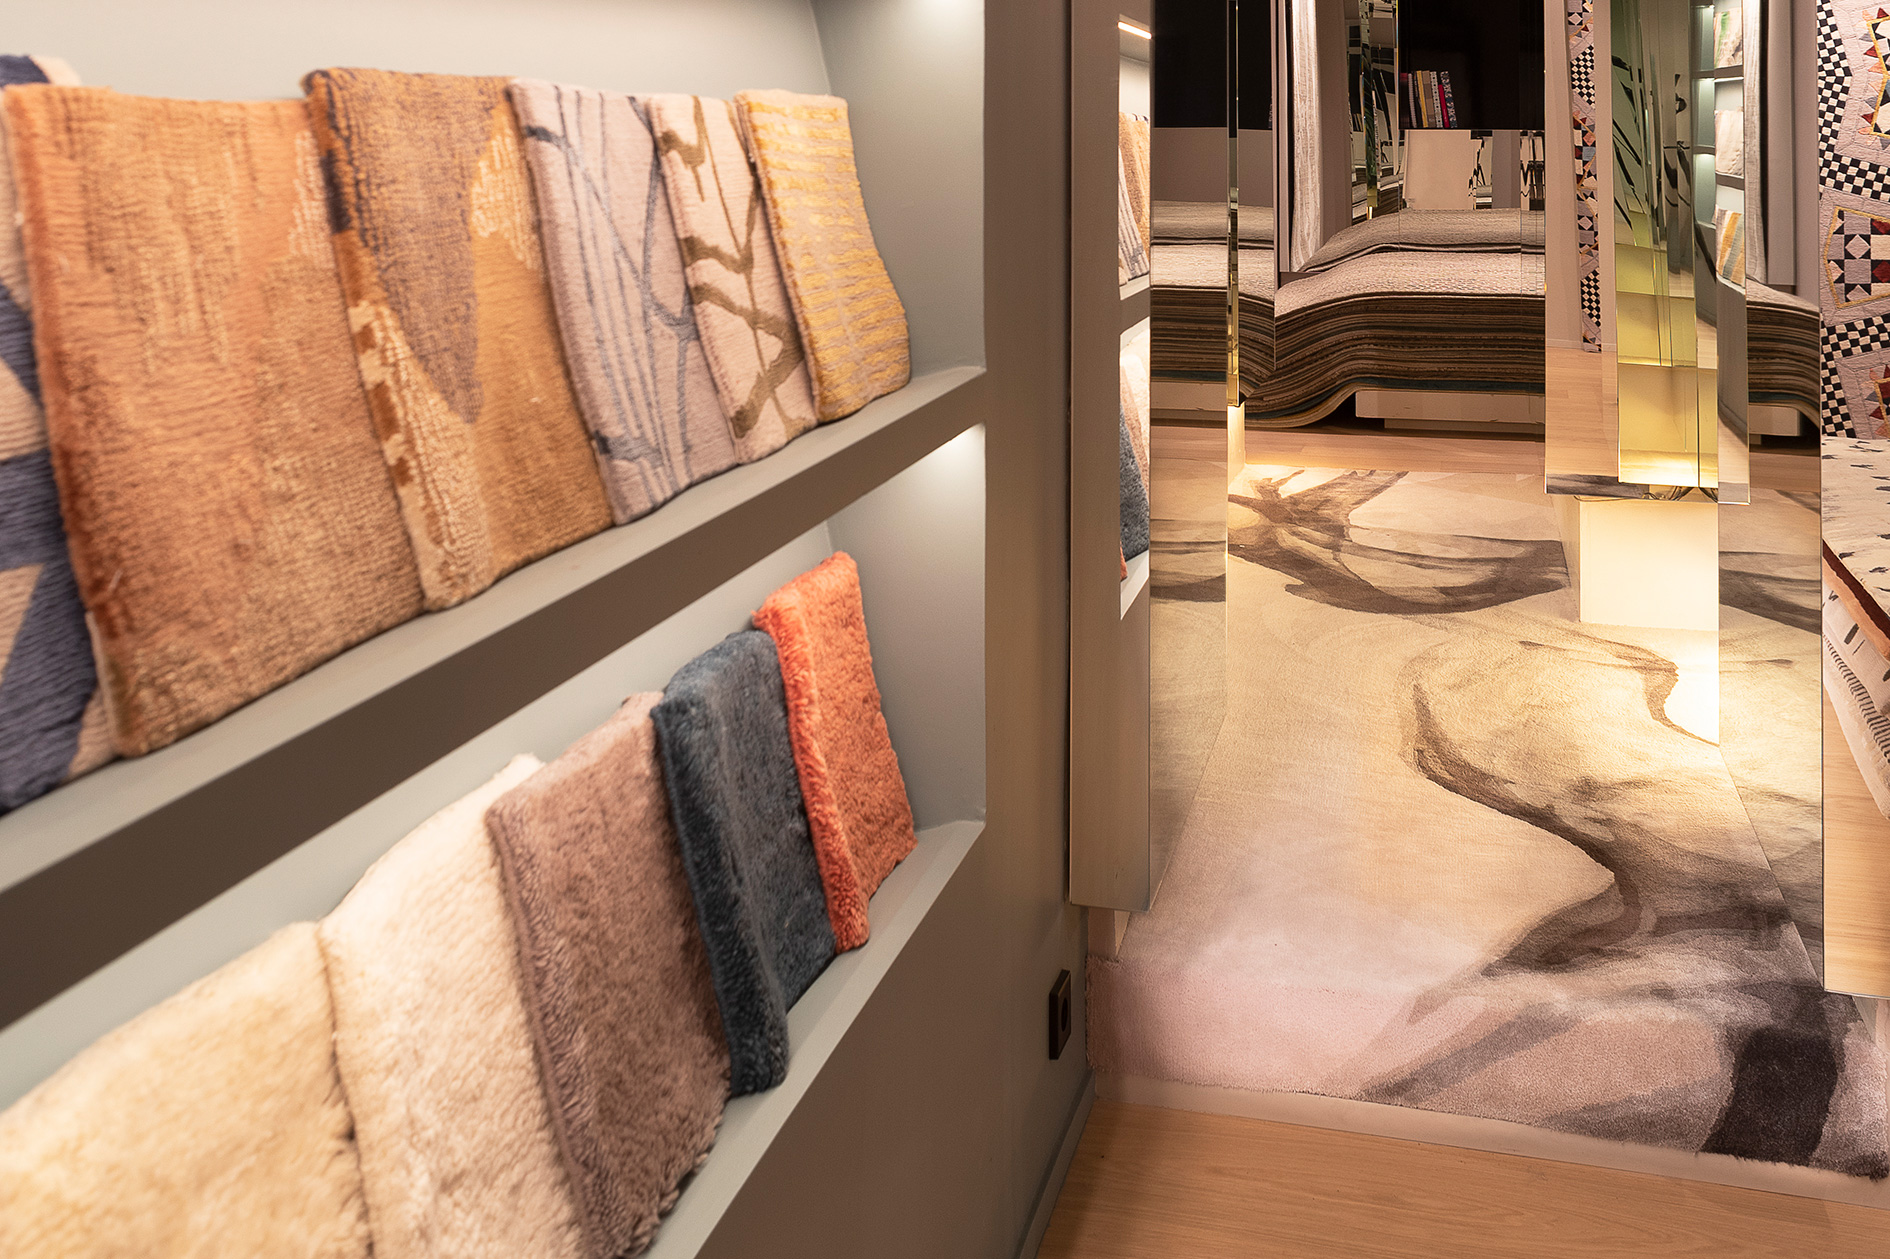 The Rug Company by BSB (Madrid, Spain)